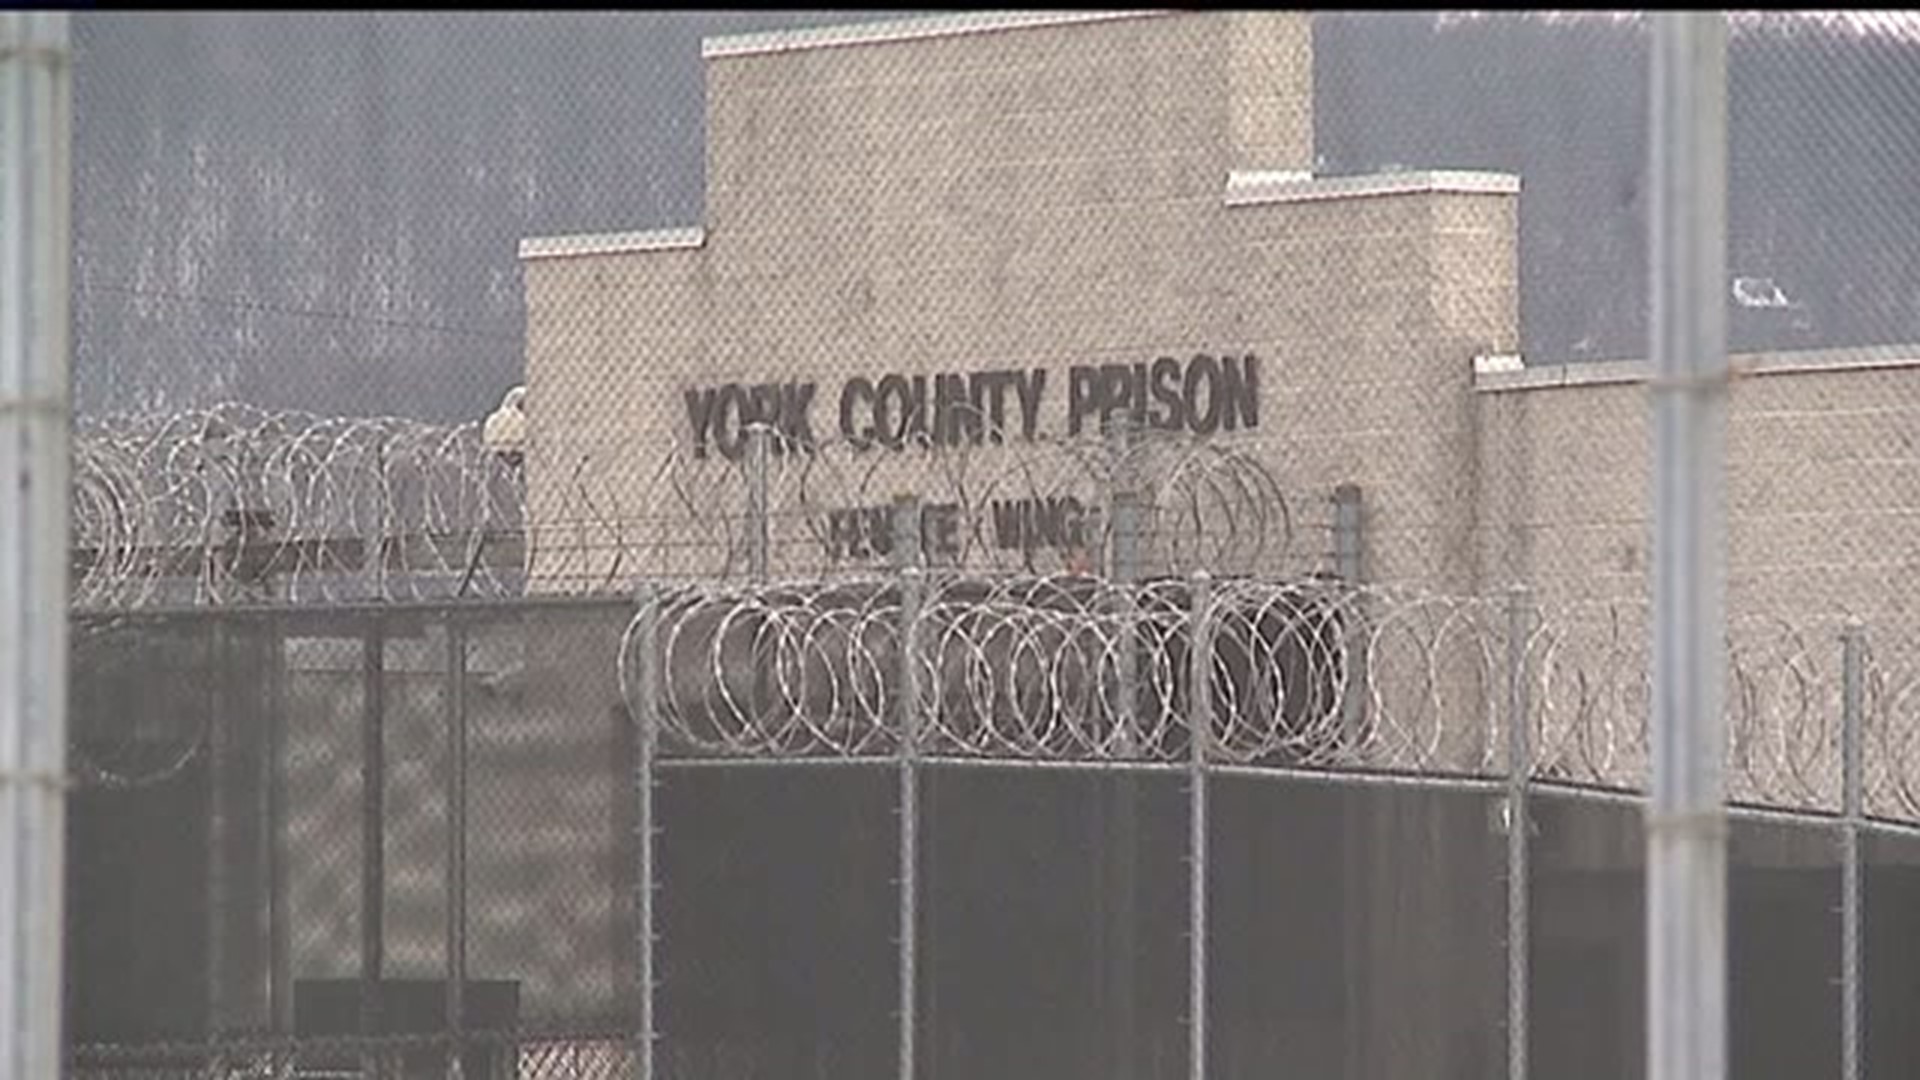 York County Prison could see body cameras for guards